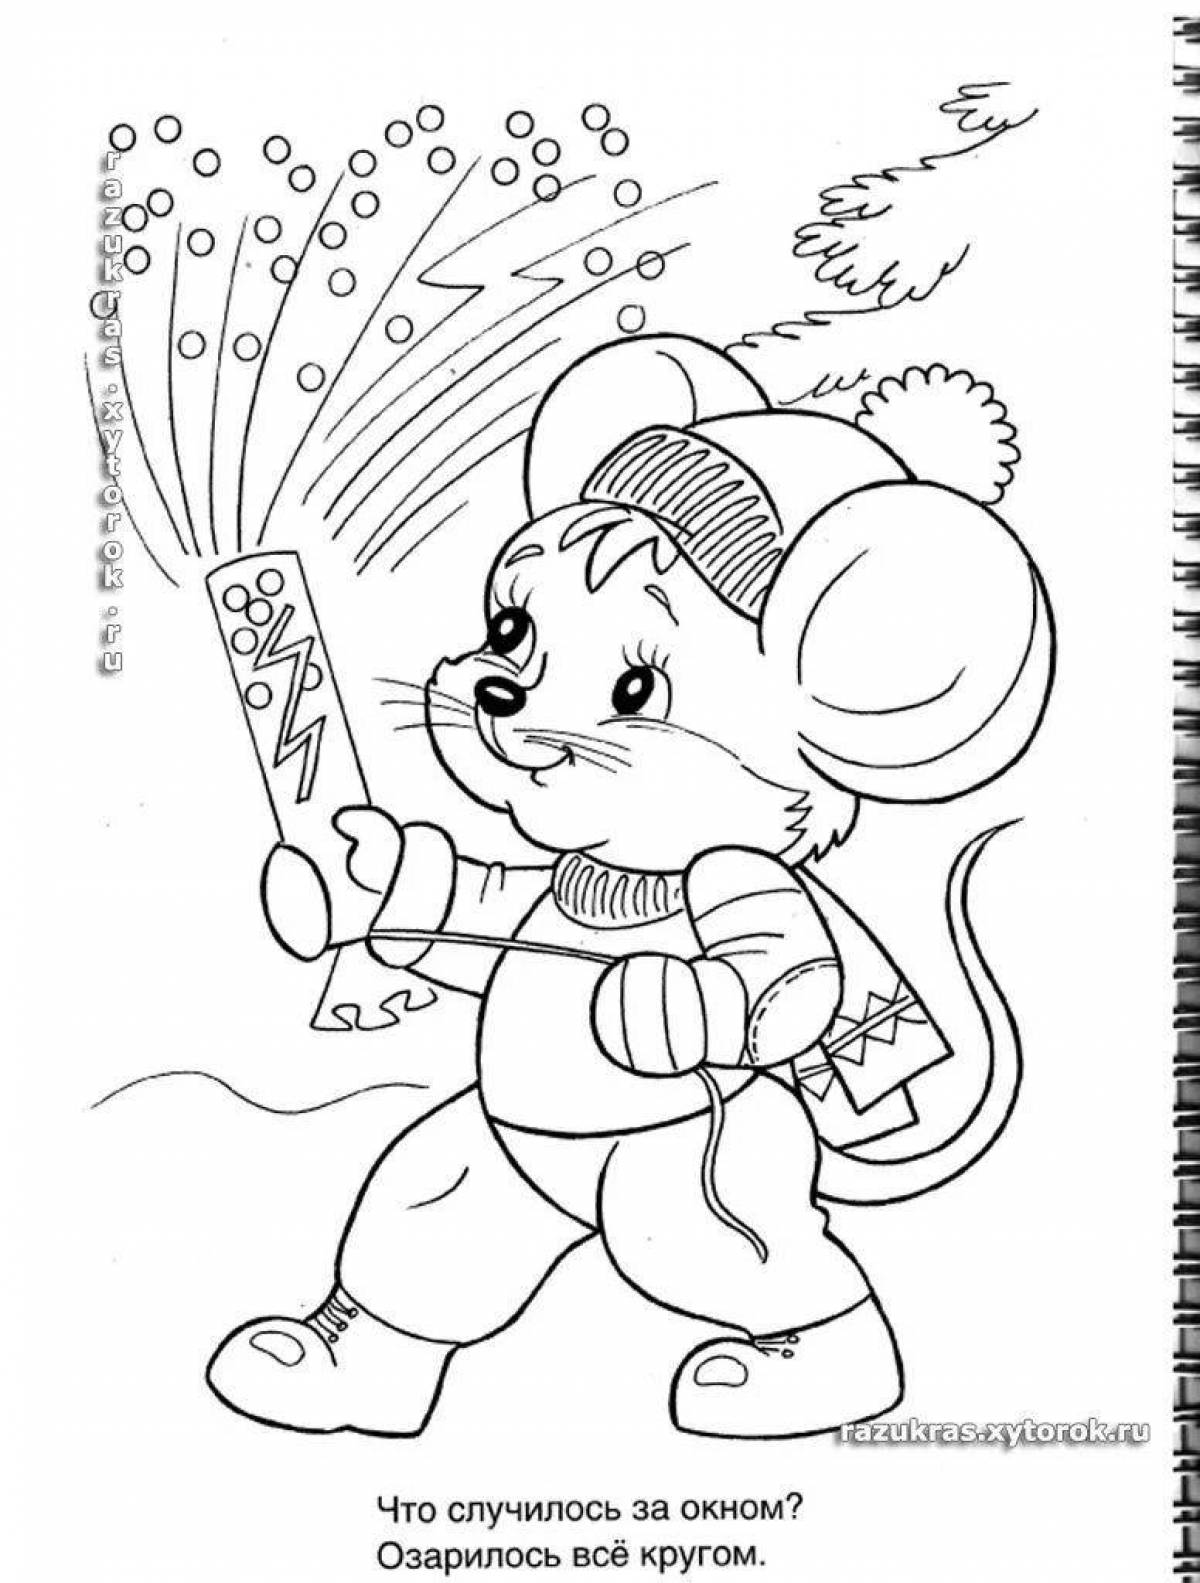 Amazing coloring book for babies